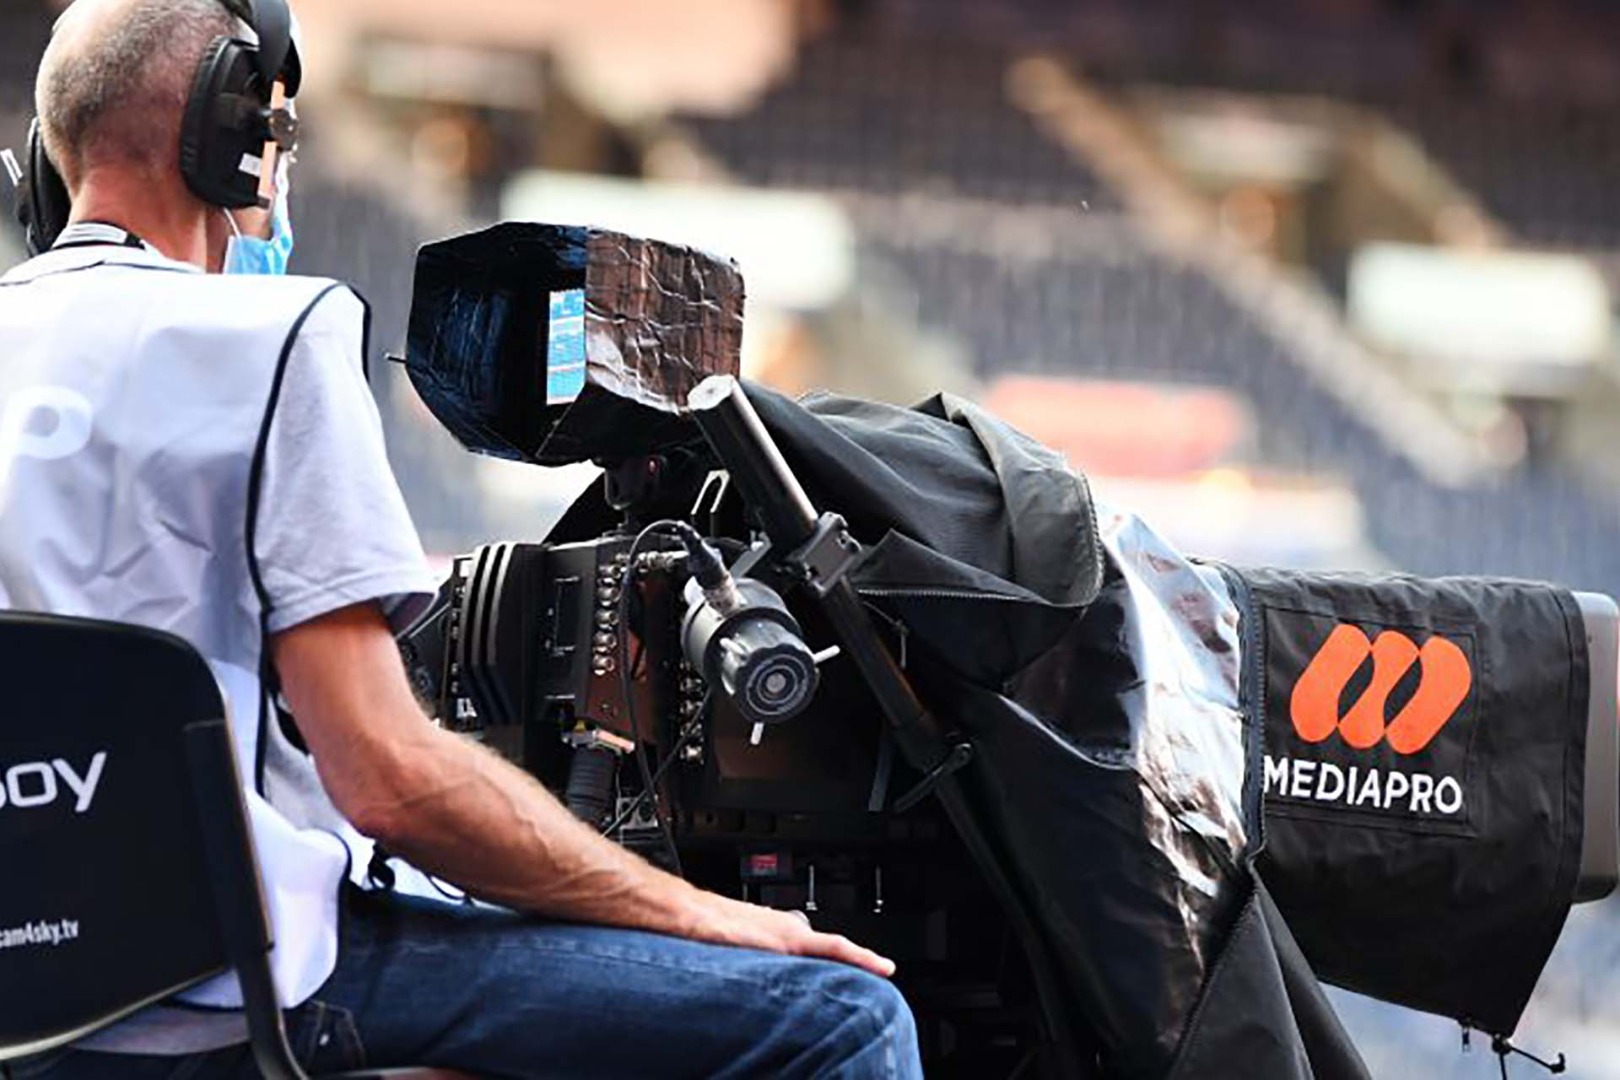 Mediapro will be in charge of the TV production. (Picture: Mediapro).